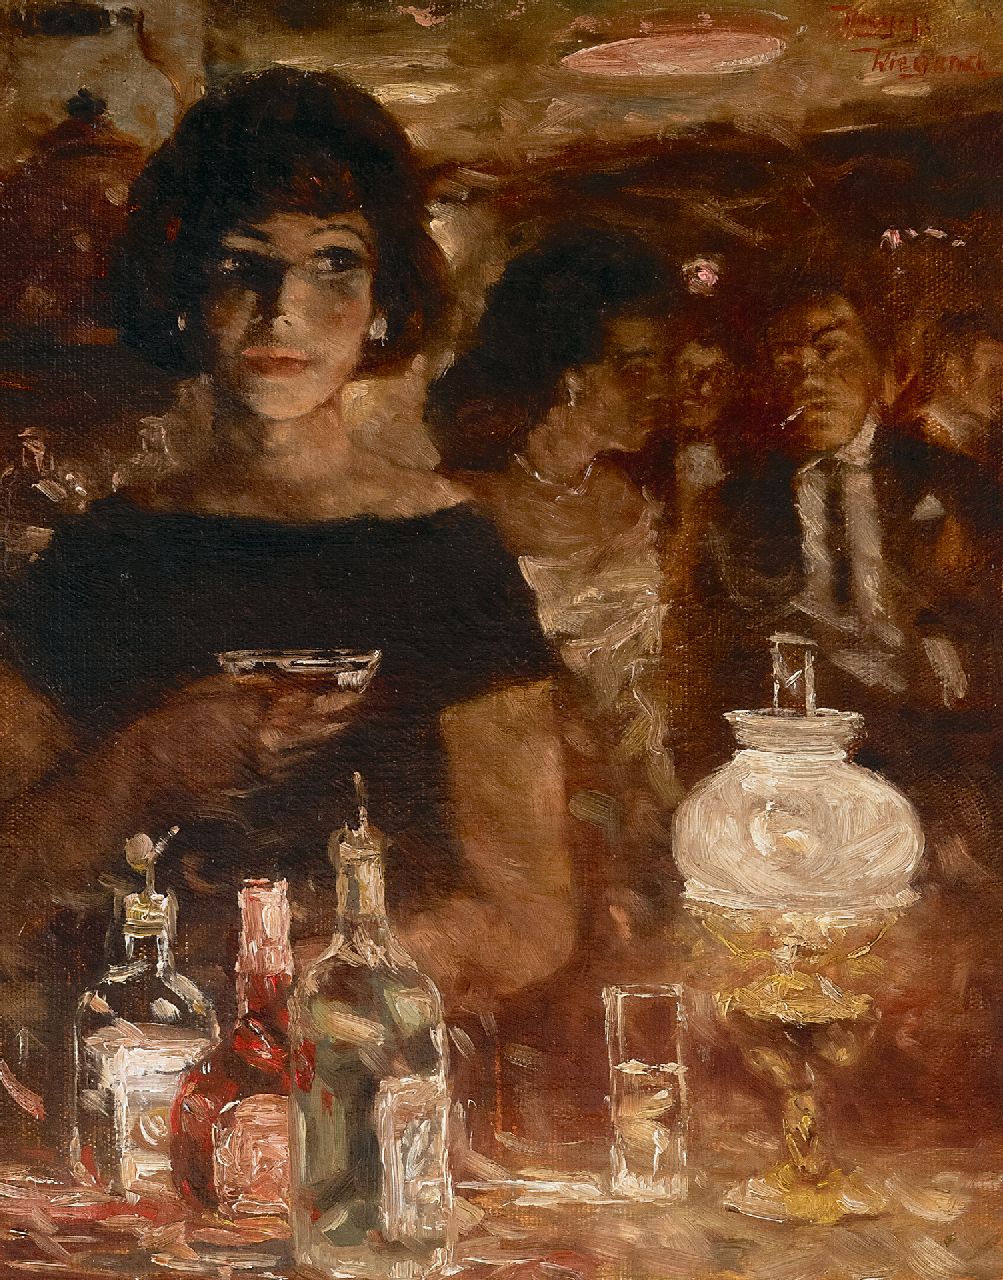 Meyer-Wiegand R.D.  | Rolf Dieter Meyer-Wiegand, Cocktail at the bar, oil on panel 30.0 x 24.0 cm, signed u.r.